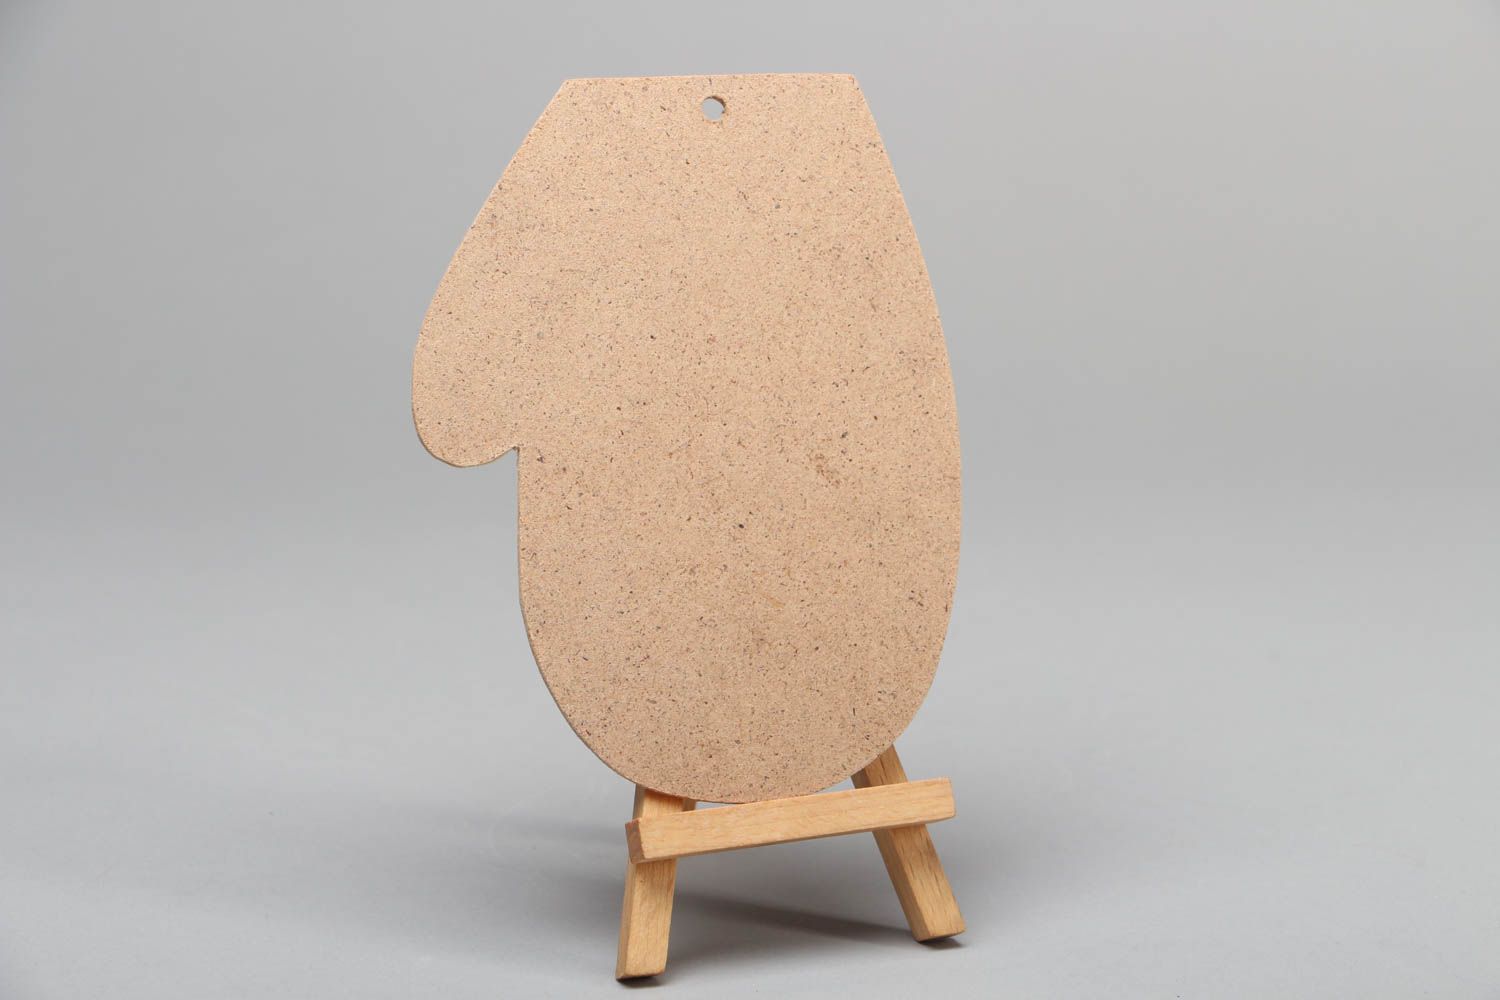 Plywood blank mitten for creative work photo 1